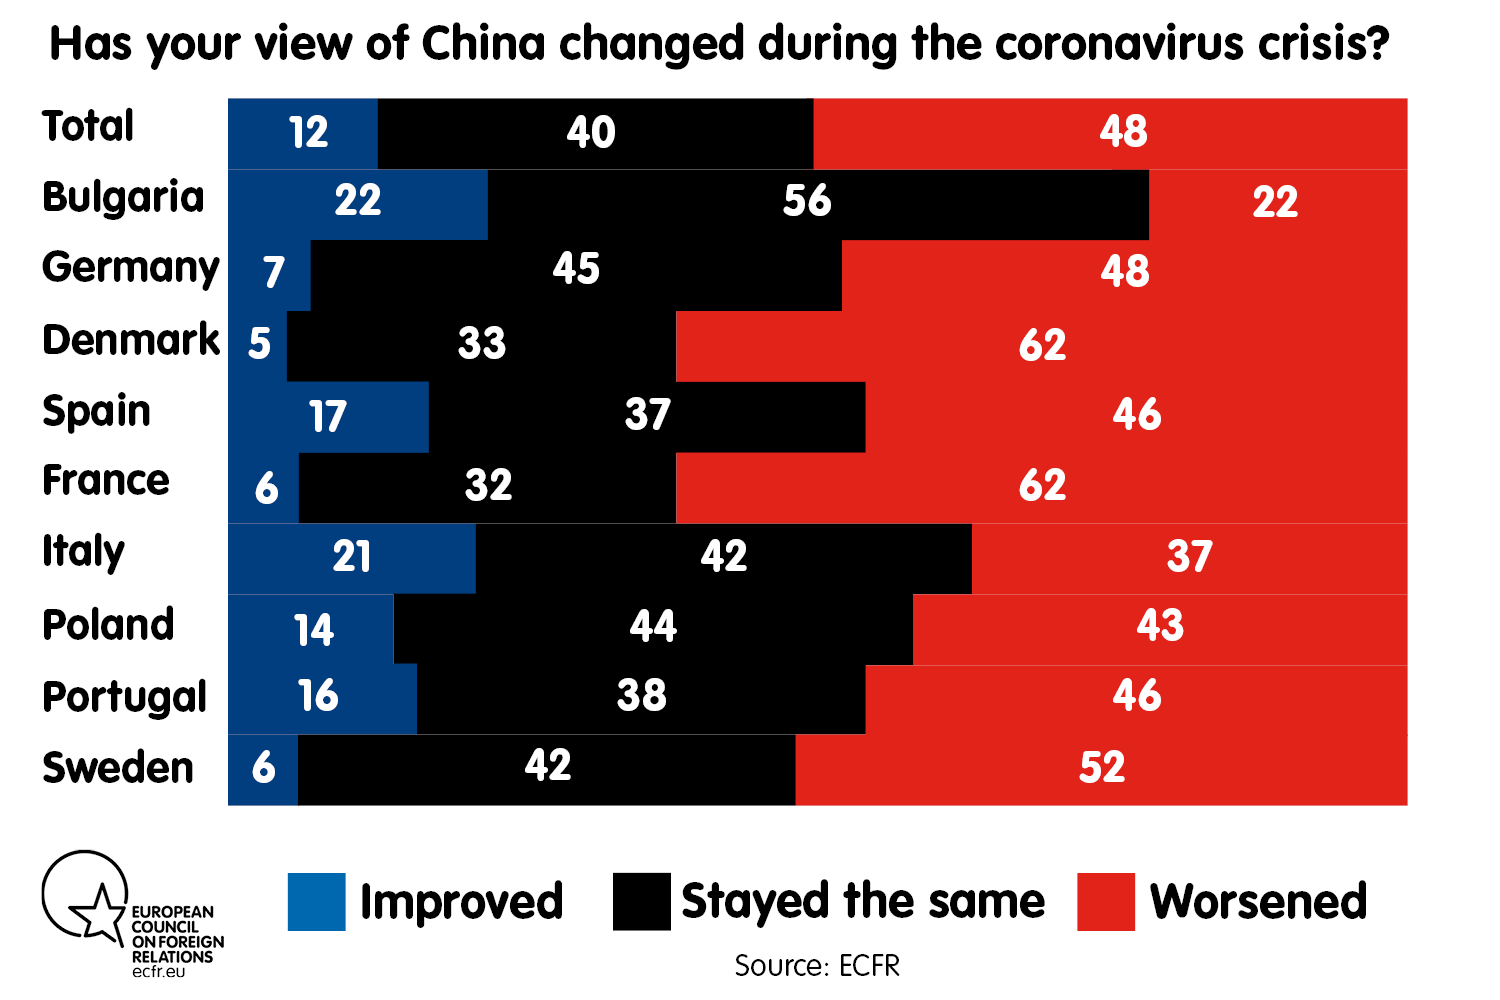 Has your view of China changed during the coronavirus crisis?